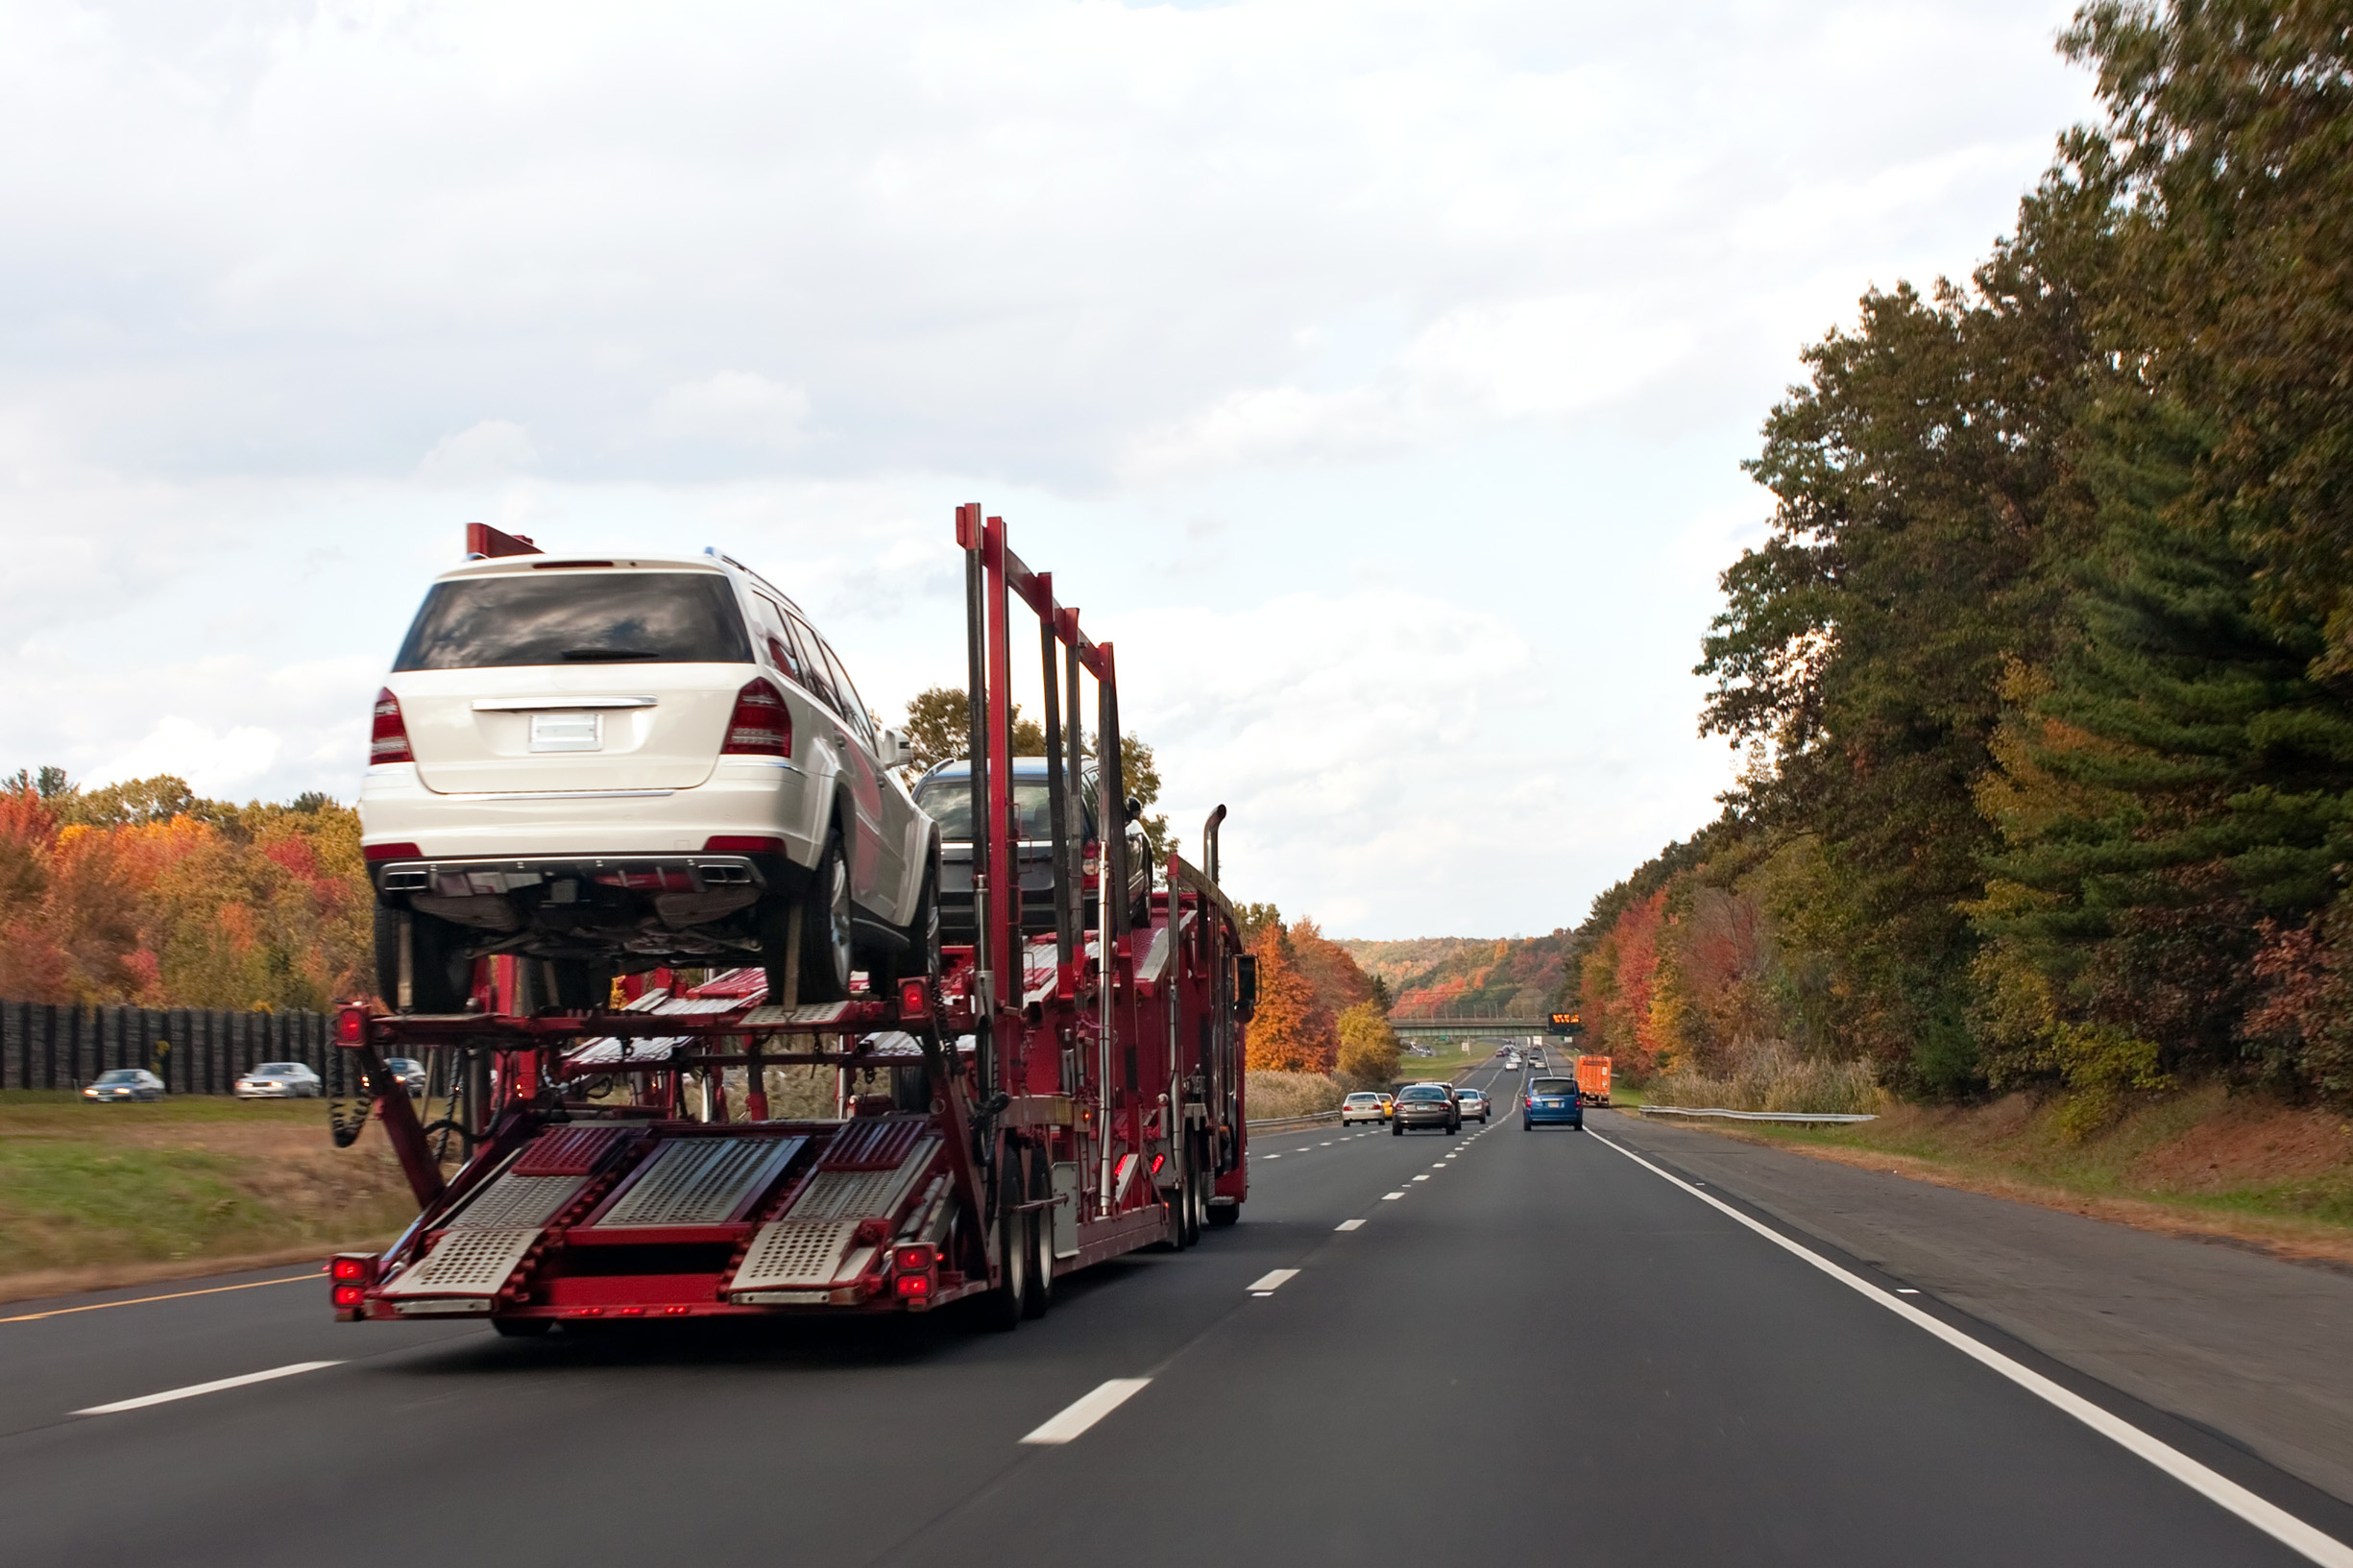 an automotive car carrier truck driving down the highway with a full load of new vehicles SYRbHsv0So